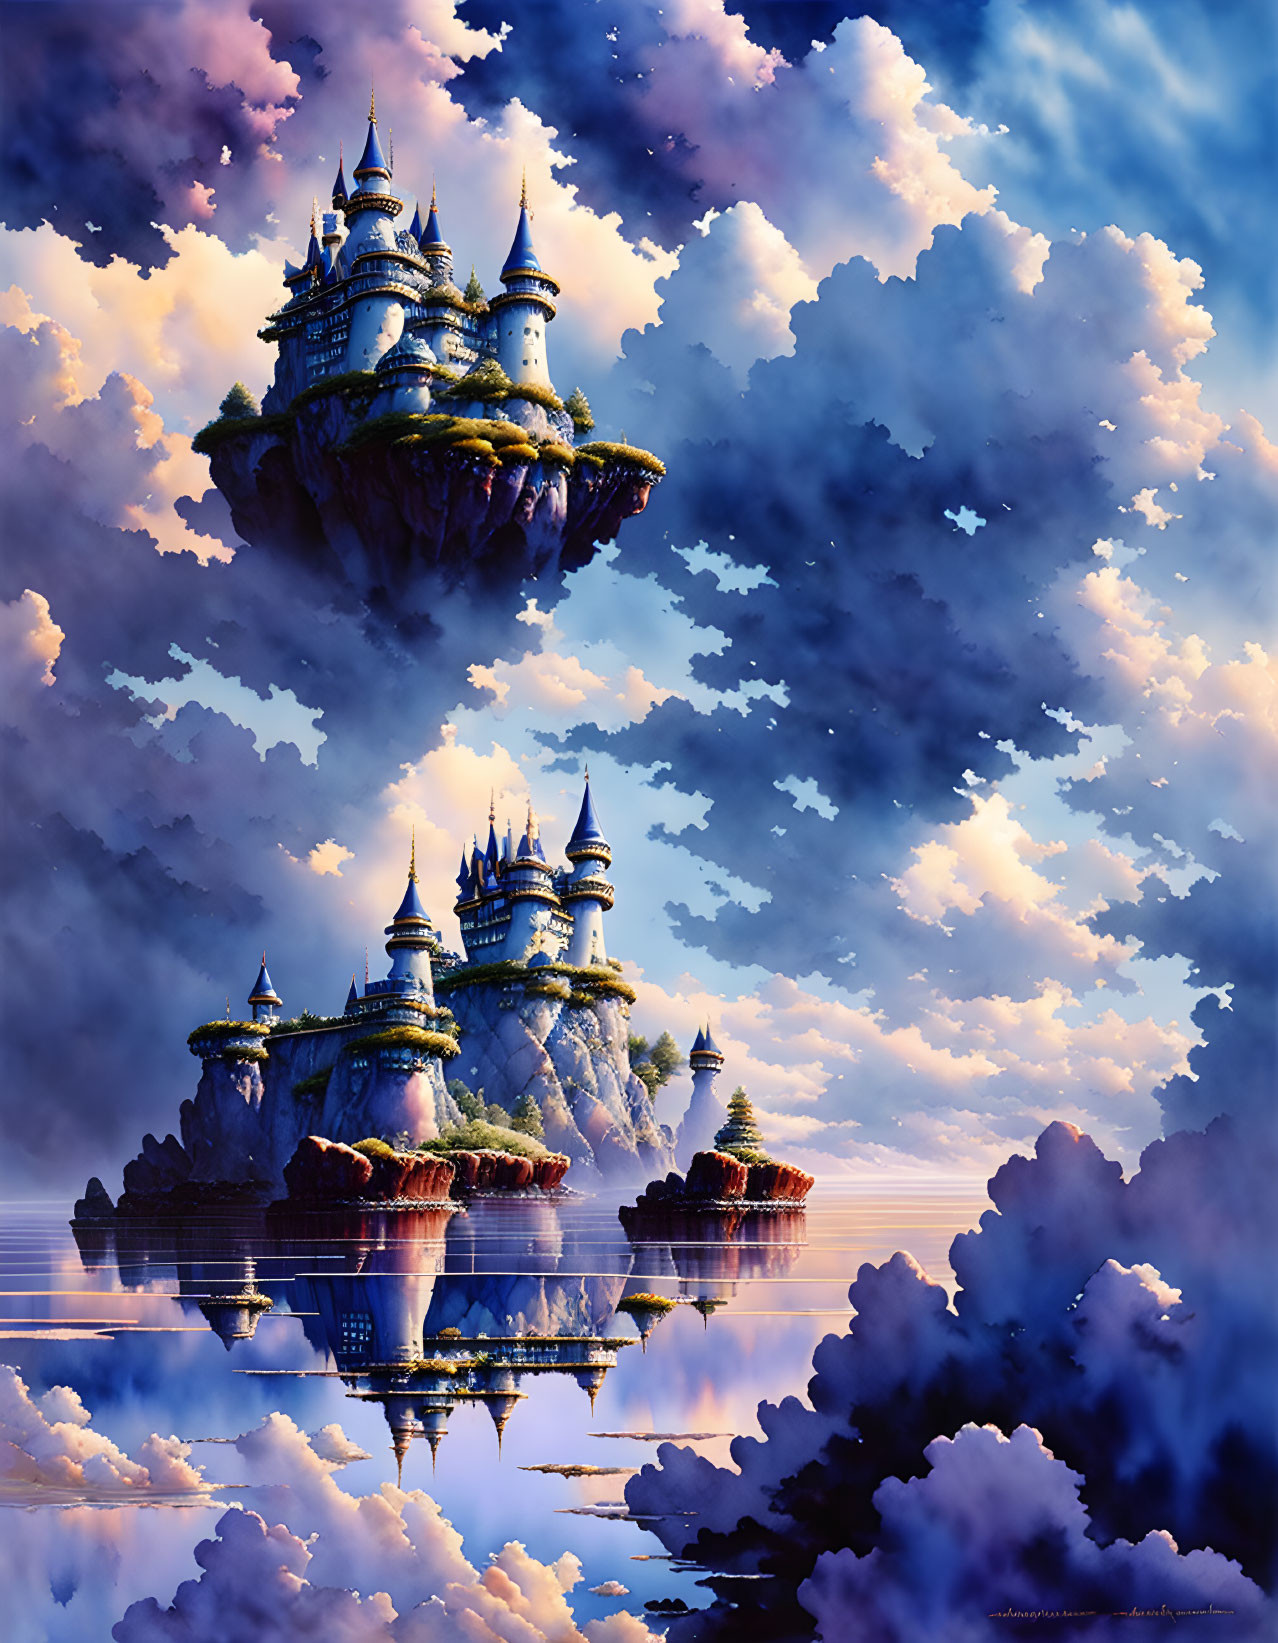 floating castle in the clouds